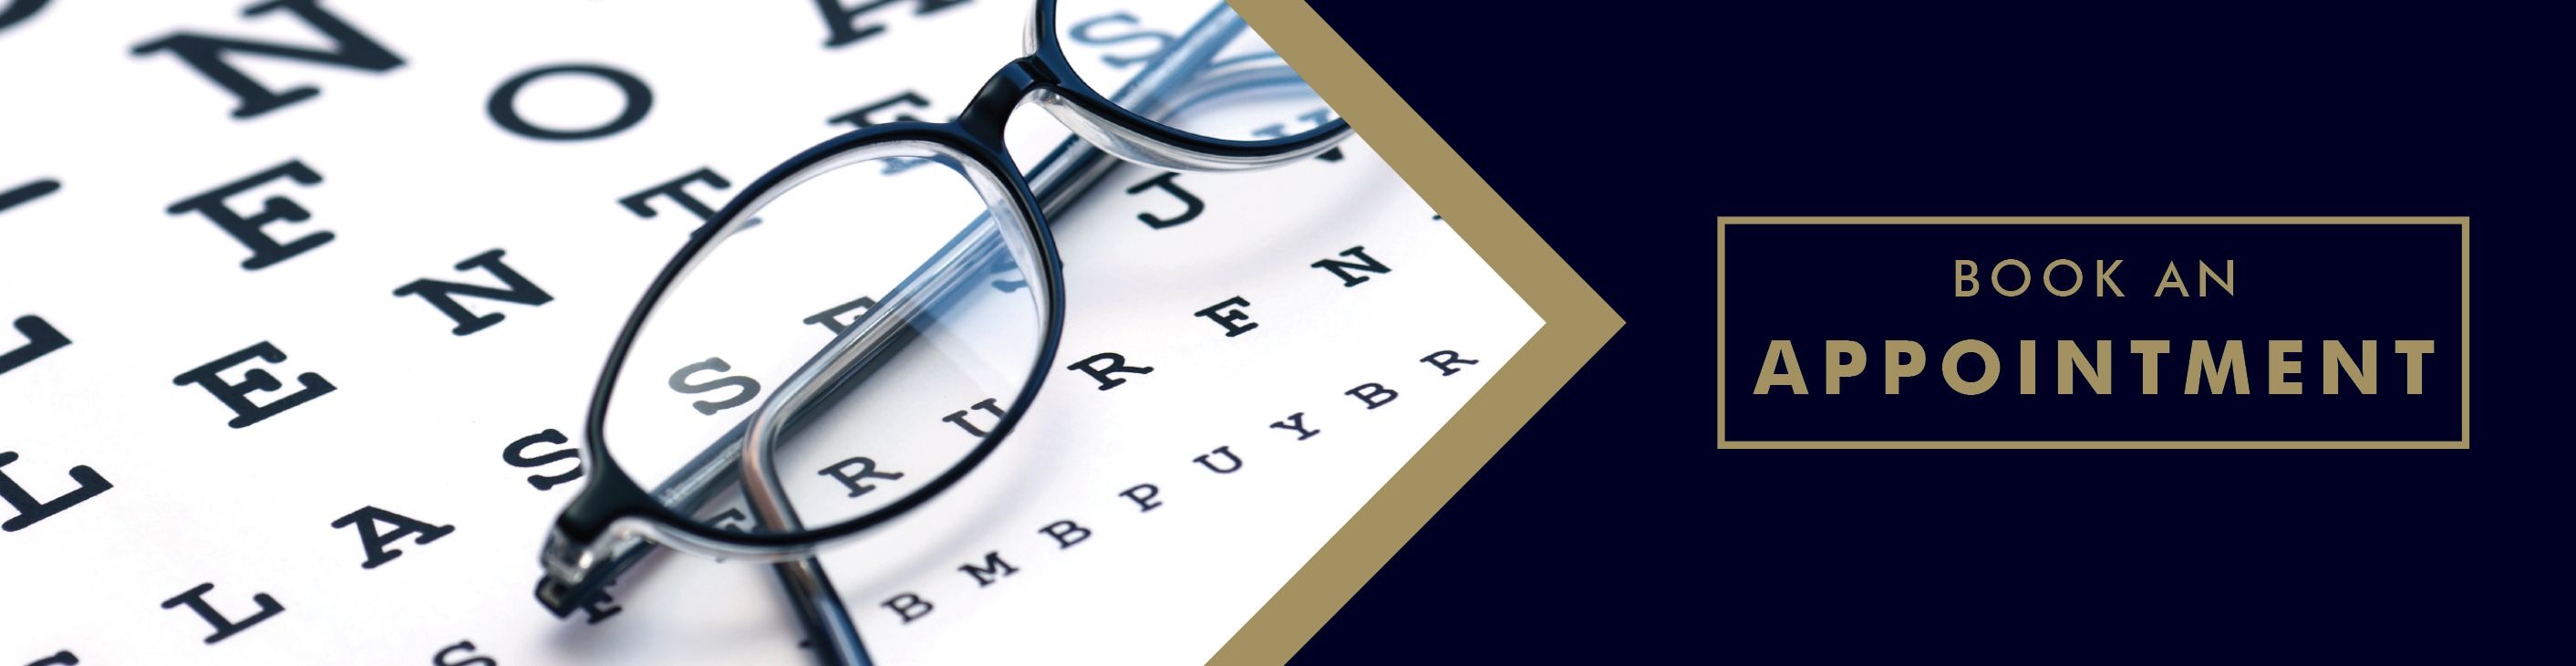 Eye Test Book an appointement Graphic